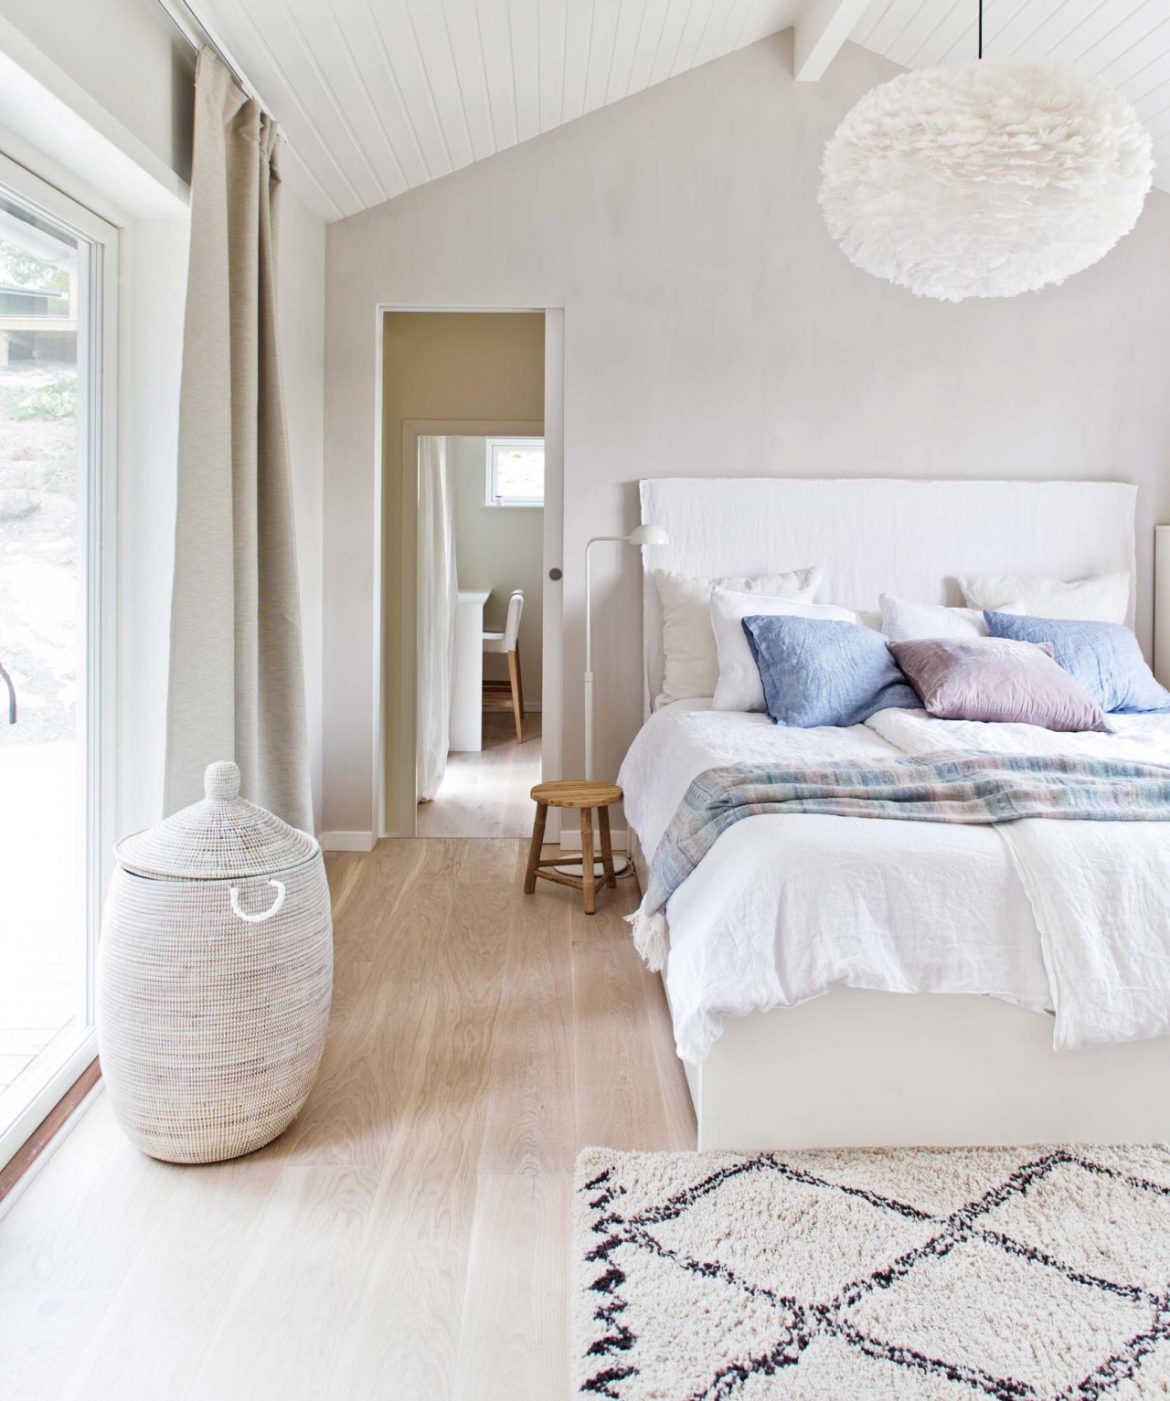 HOW TO MAKE YOUR SMALL BEDROOM LOOKS BIGGER